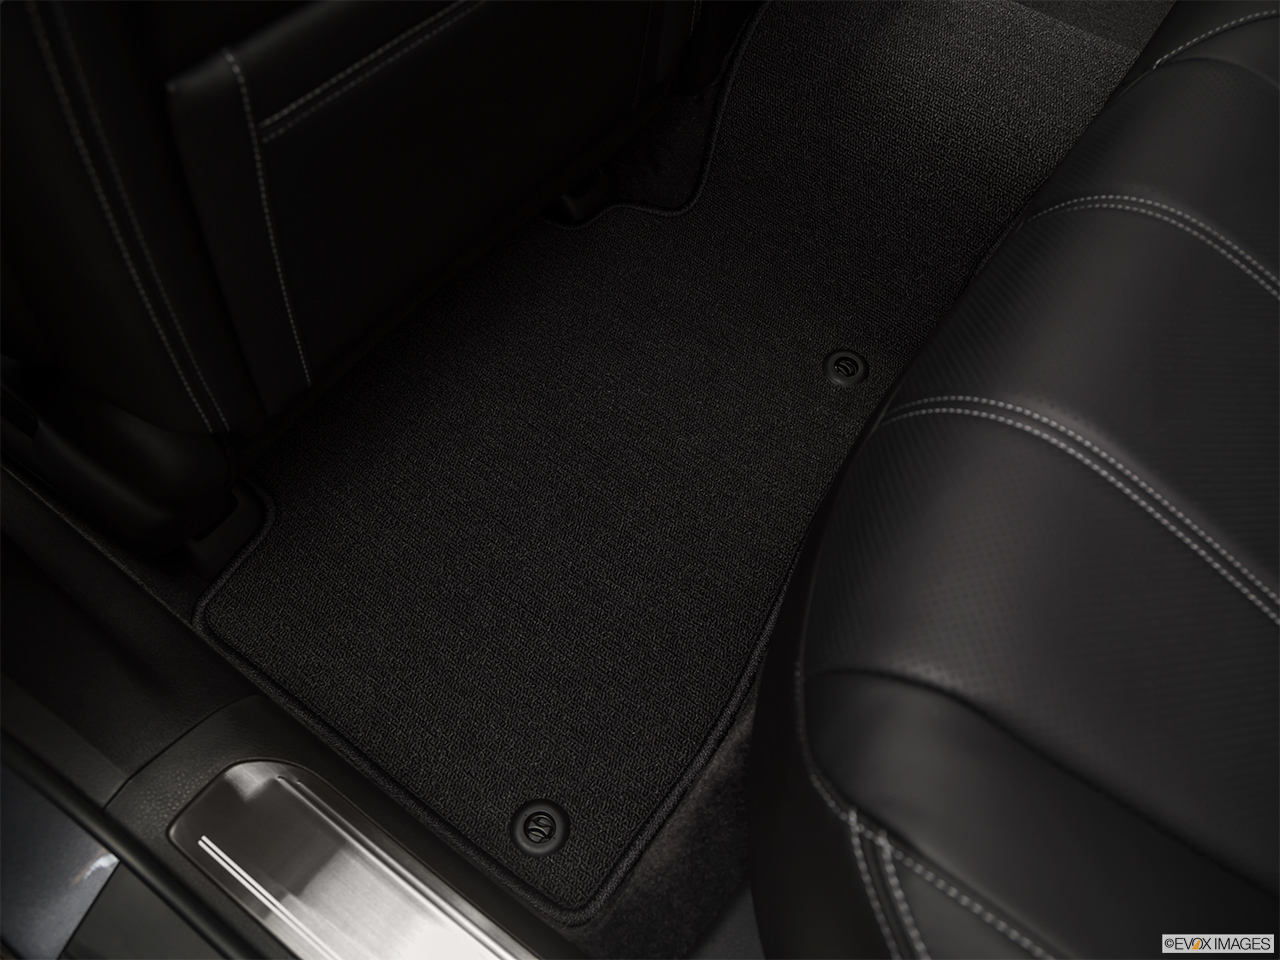 2020 Acura RLX Sport Hybrid SH-AWD Rear driver's side floor mat. Mid-seat level from outside looking in. 